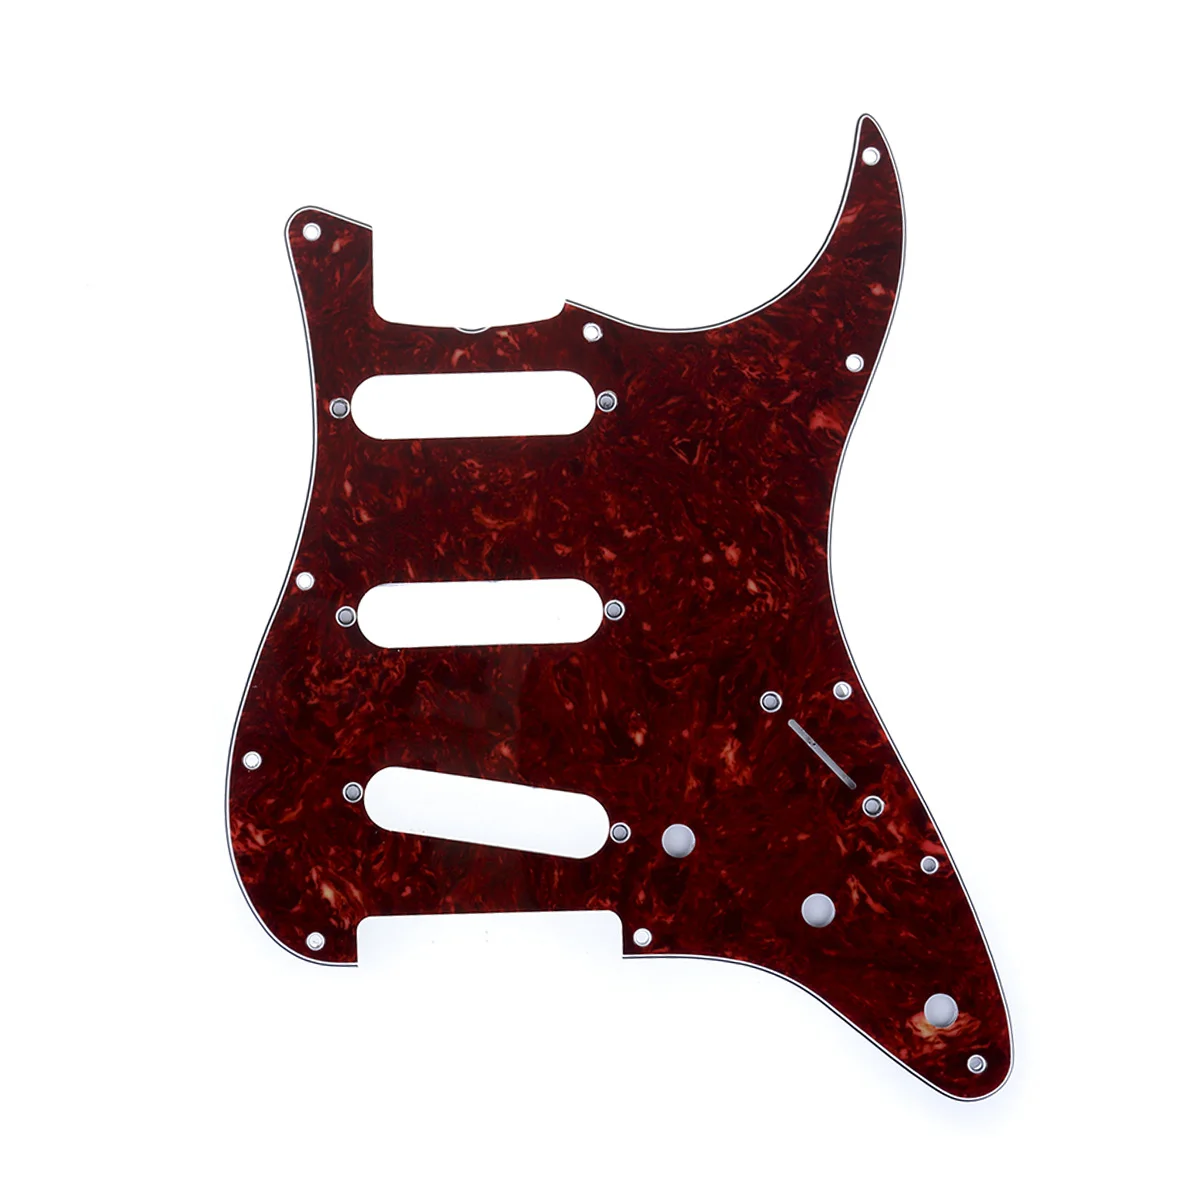 

Musiclily Pro 11-Hole 60s 64 Vintage Style Strat SSS Pickguard for American Stratocaster Guitar, 4Ply Vintage Tortoise